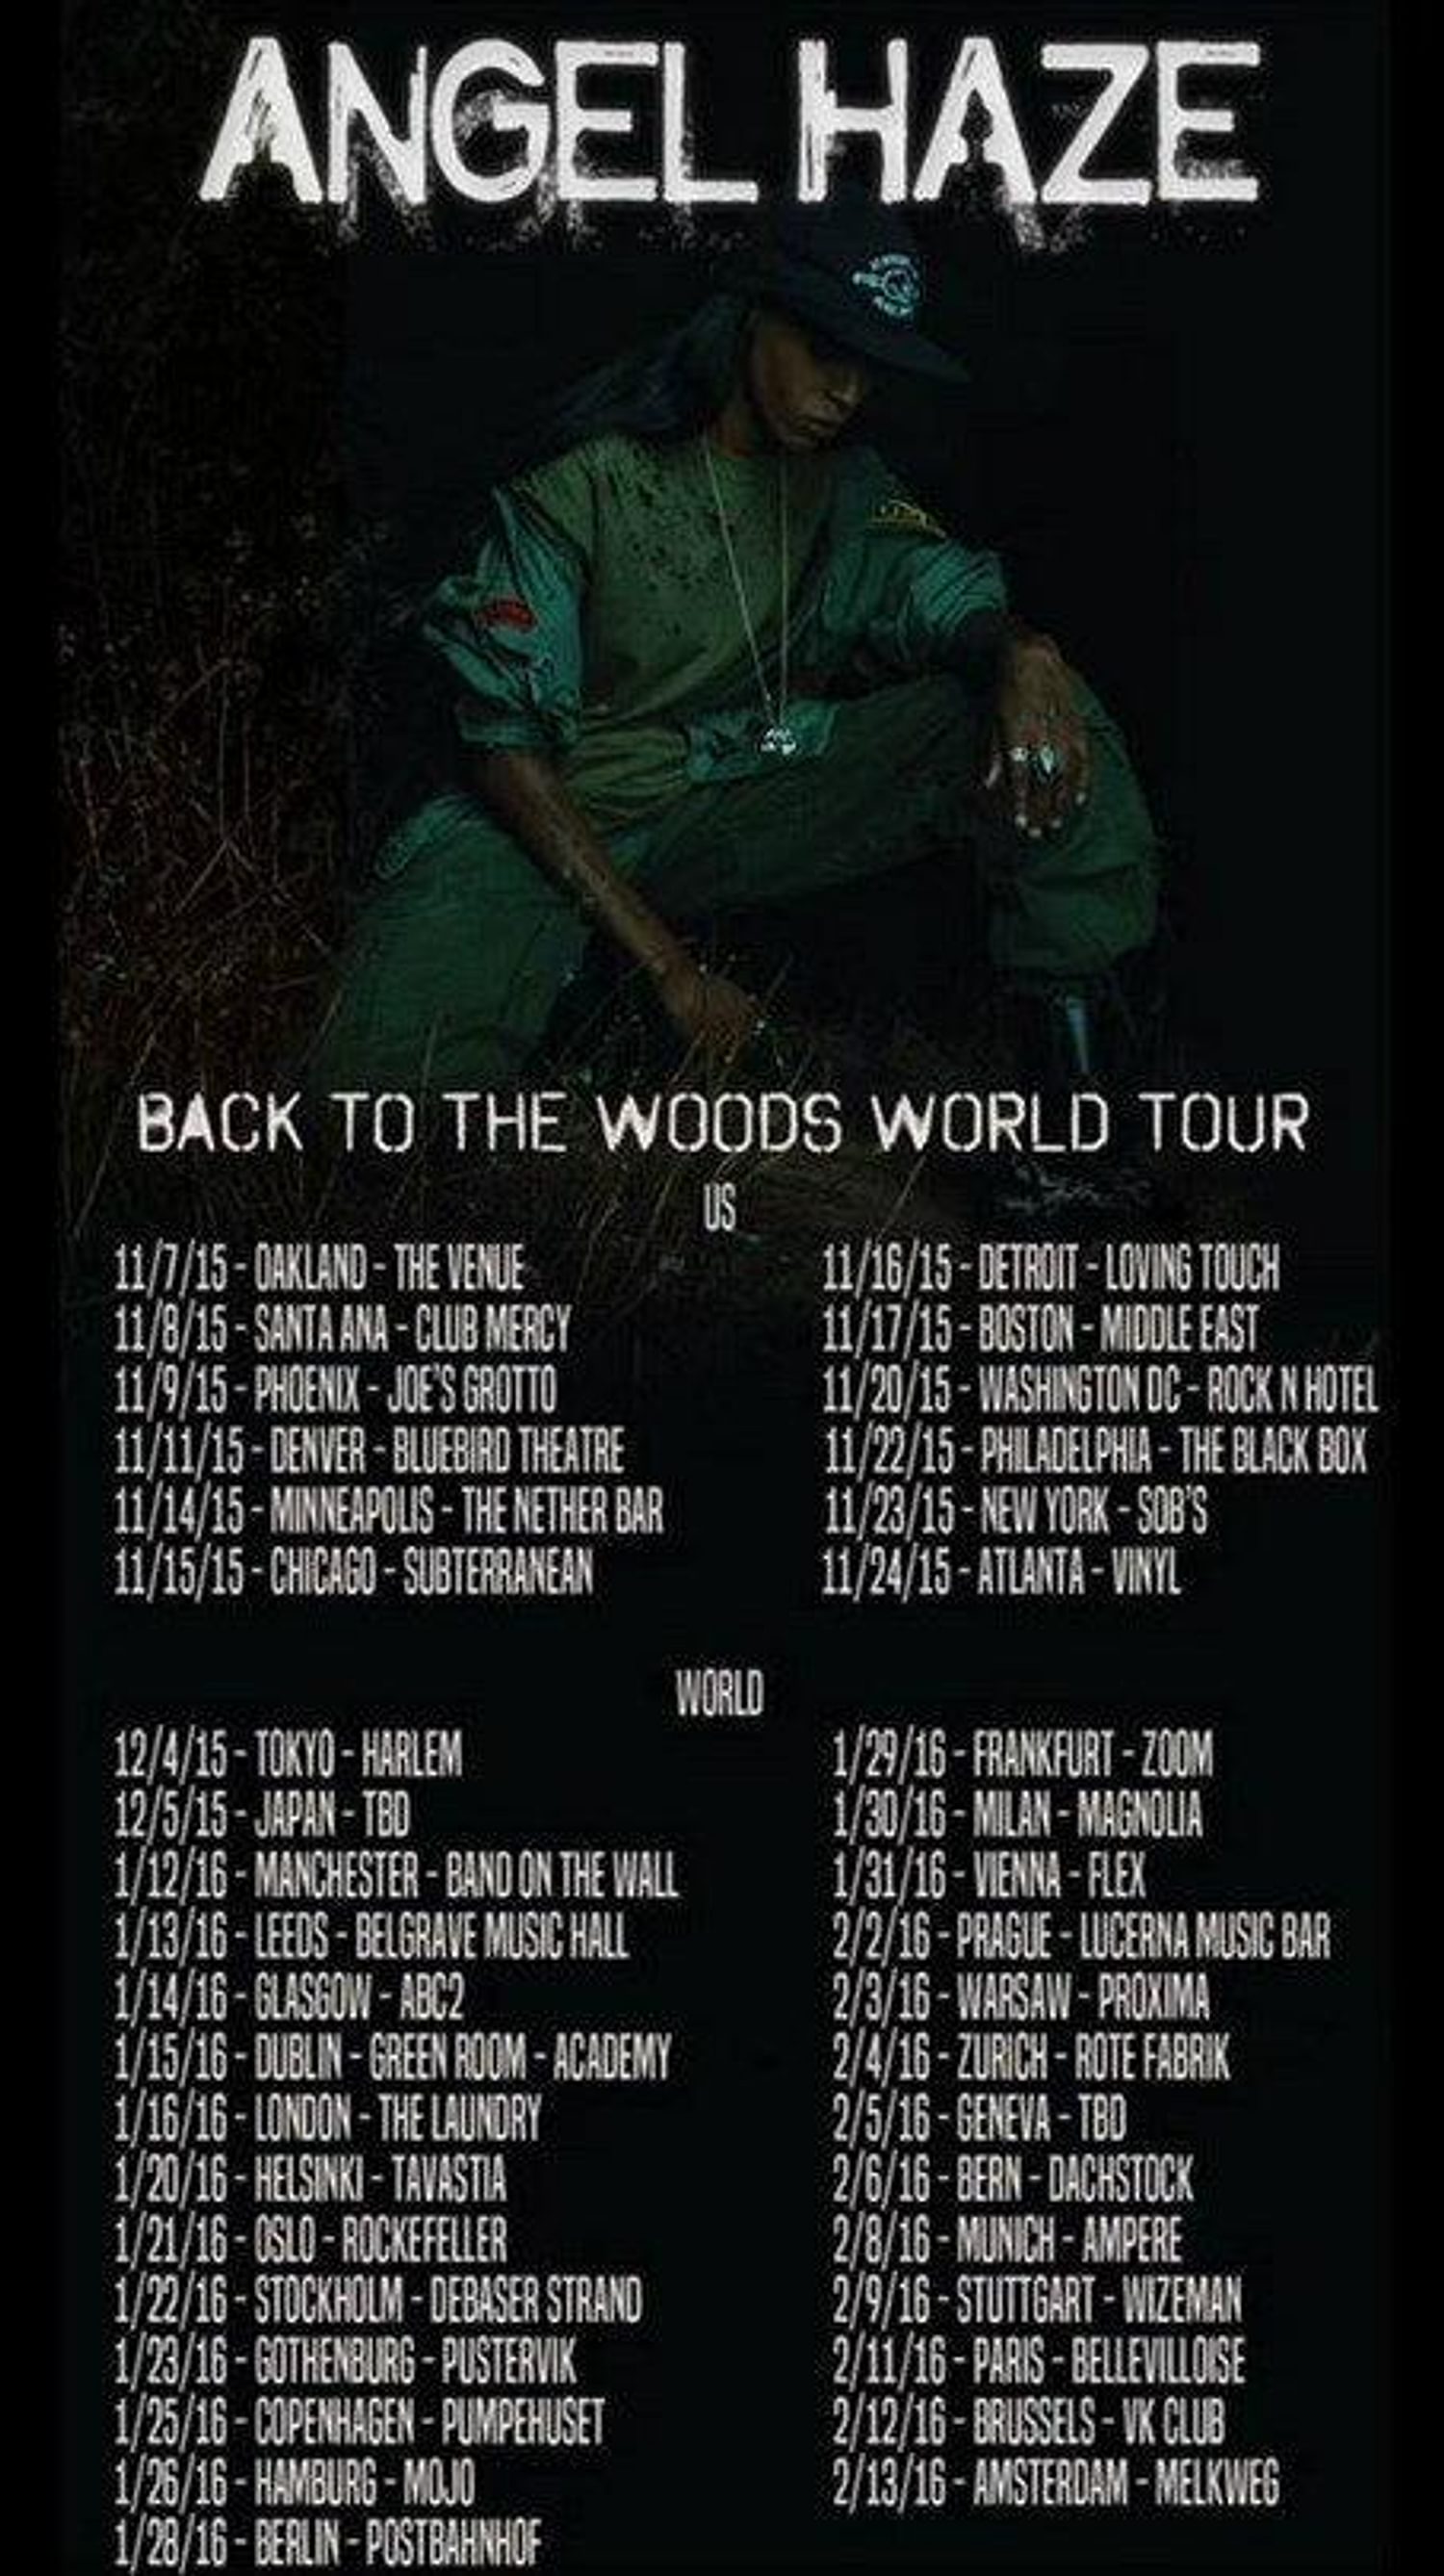 Angel Haze announces 'Back To The Woods' world tour, including UK dates